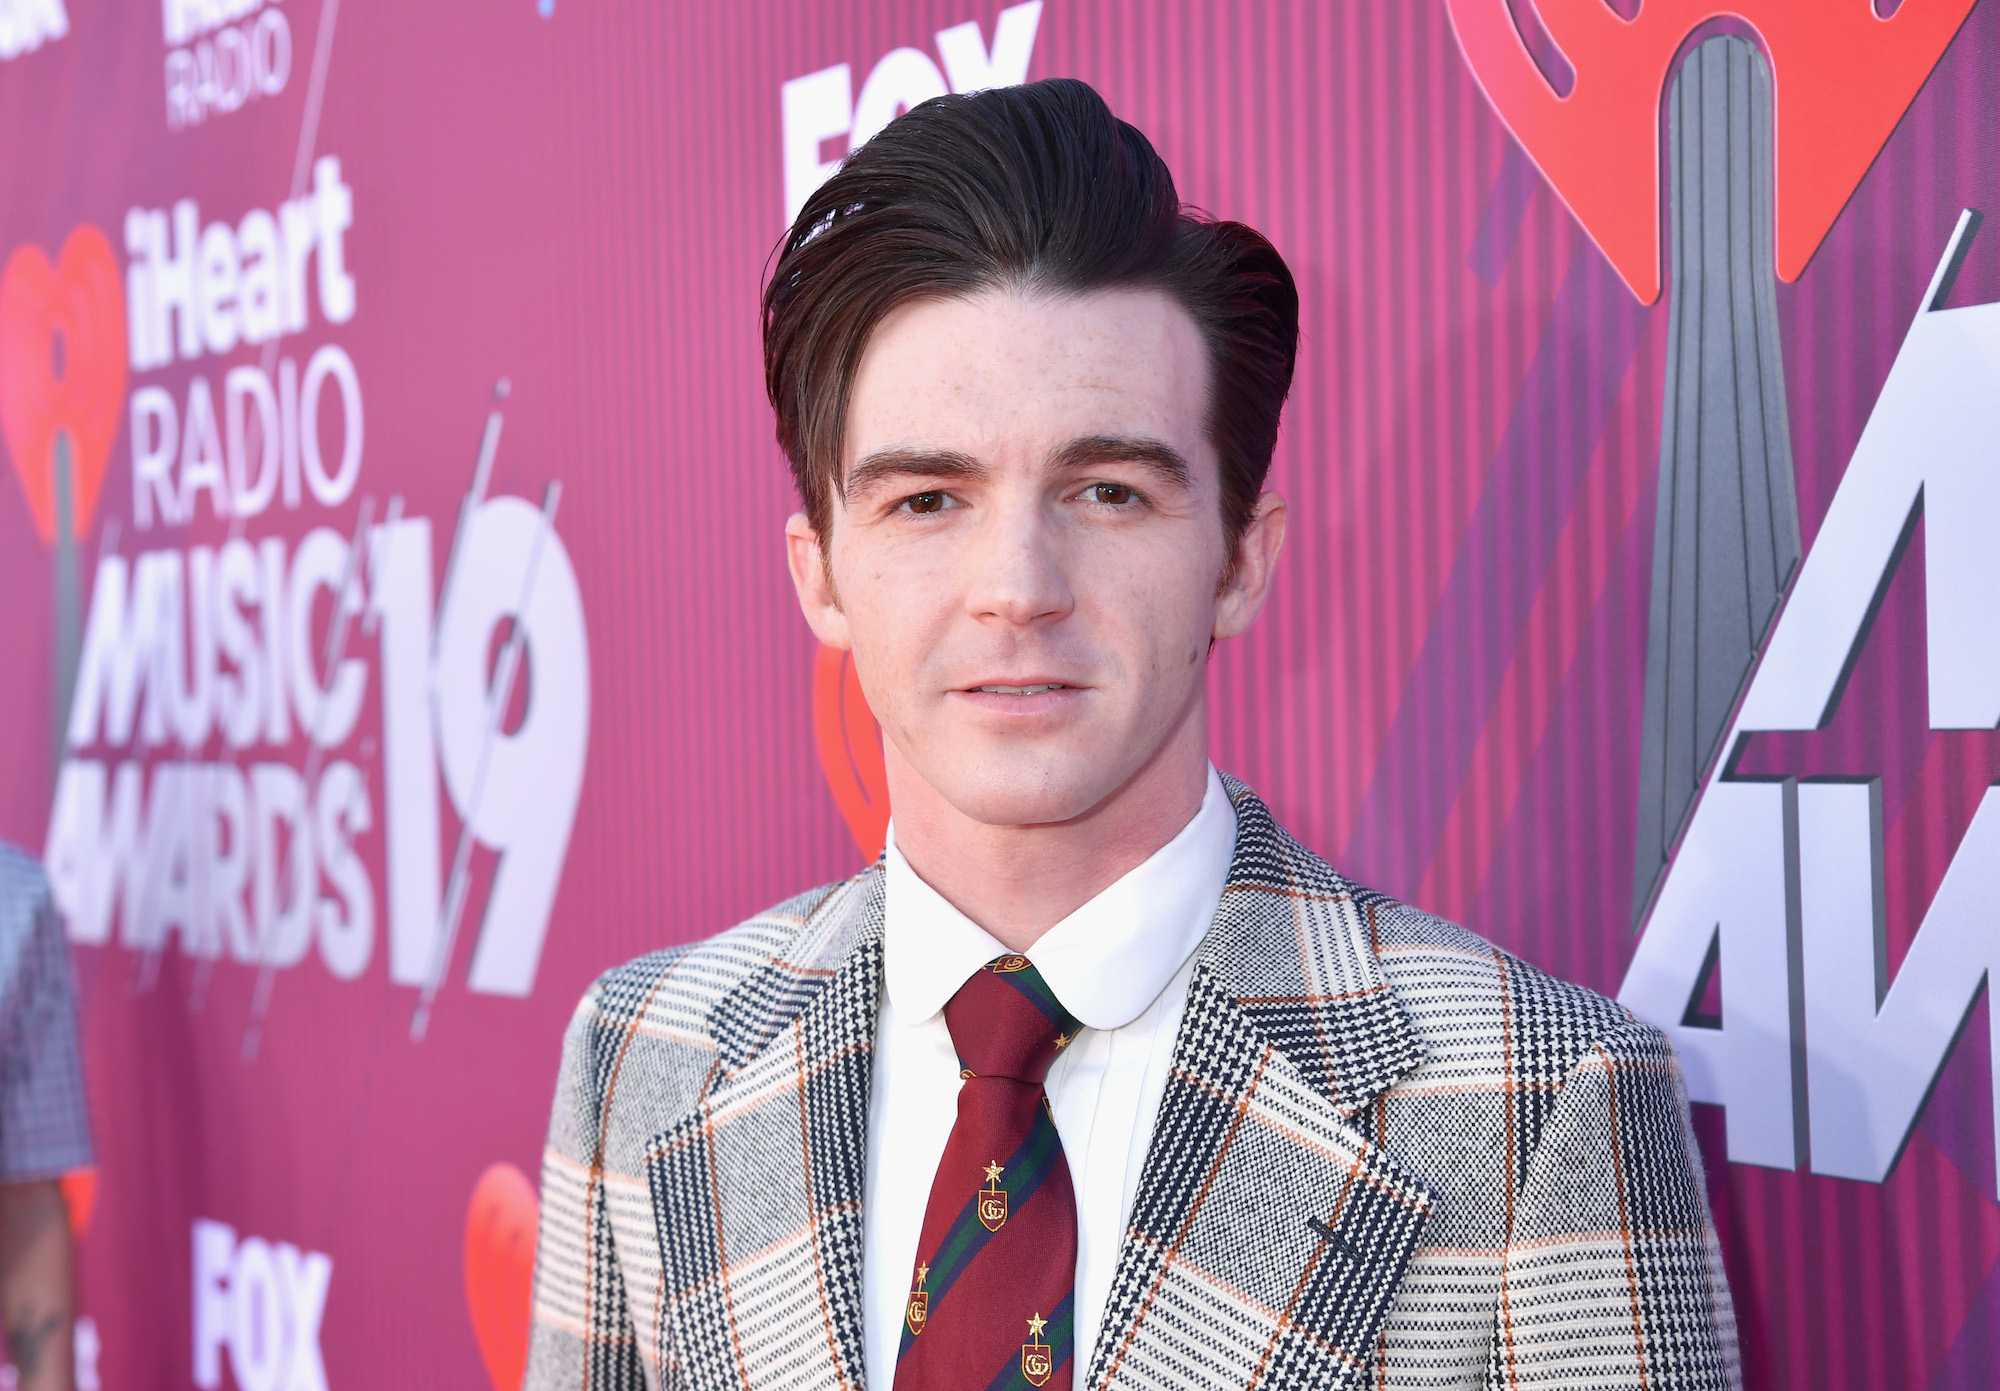 Drake Bell attends the 2019 iHeartRadio Music Awards